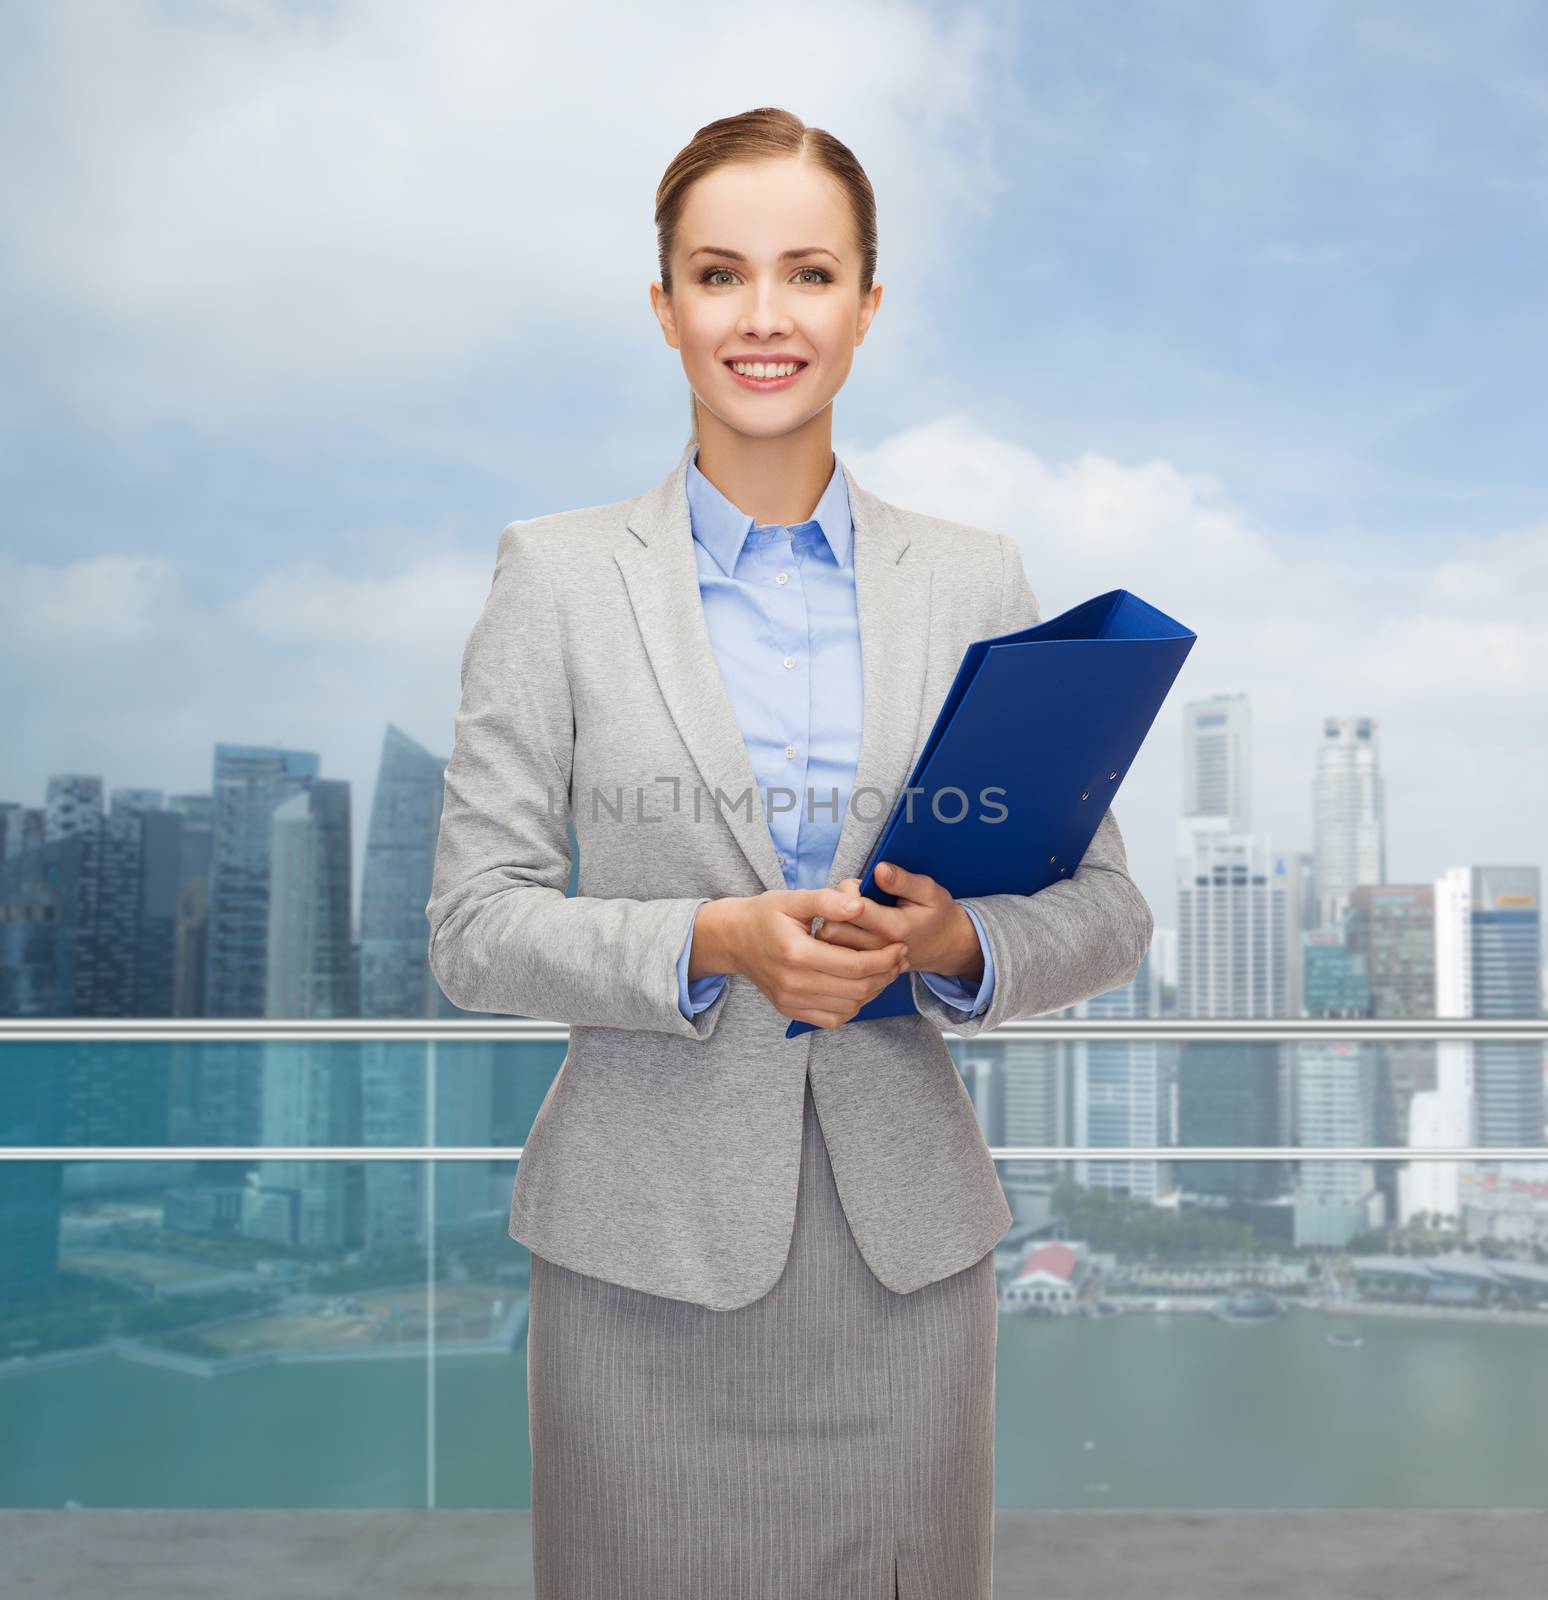 business, people and real estate concept - smiling young businesswoman holding folder over city background